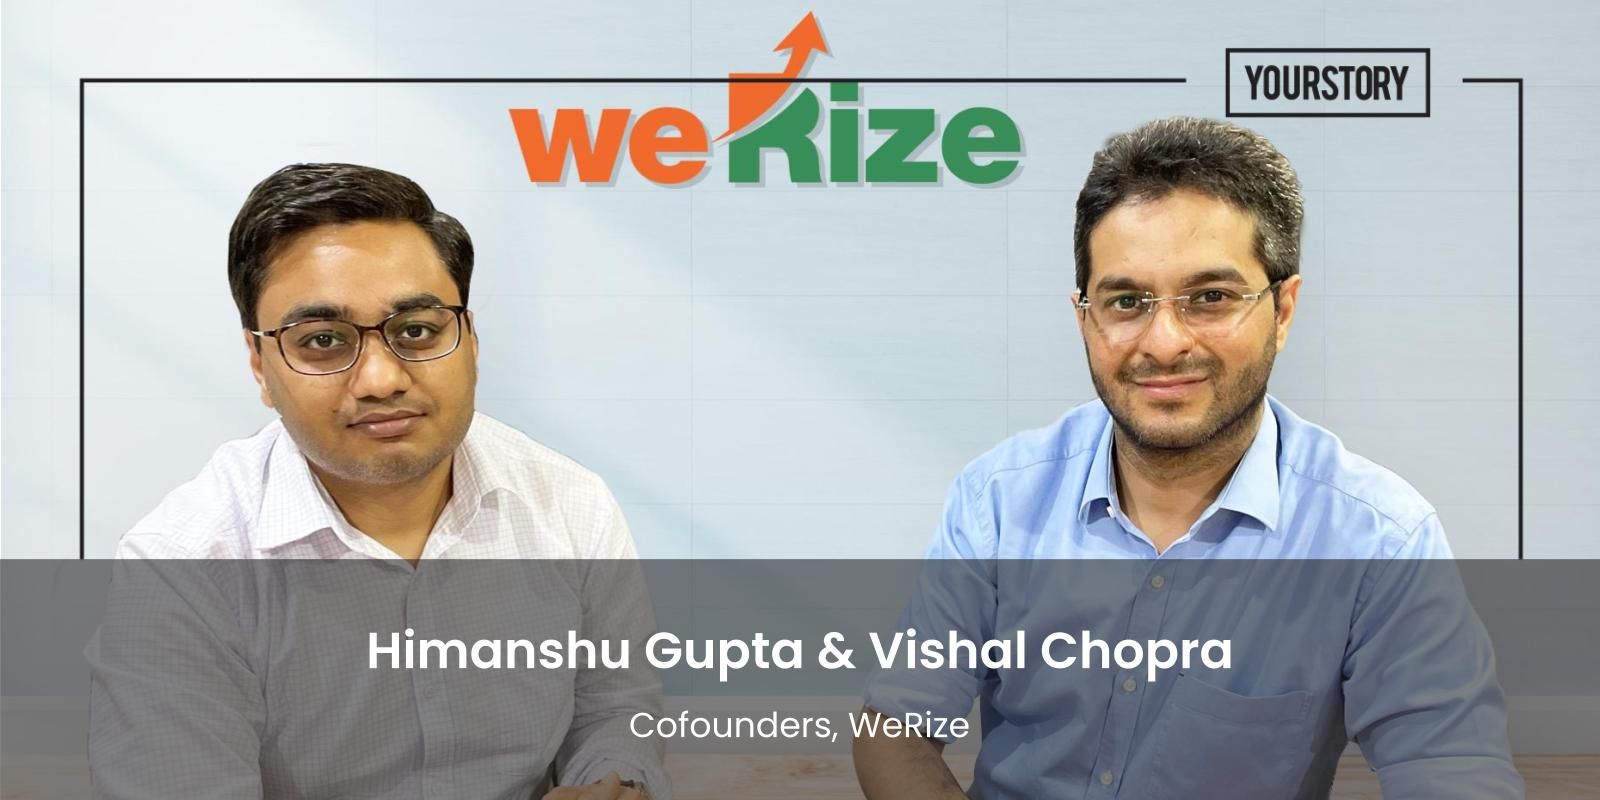 [Funding alert] Fintech startup WeRize raises $15M in Pre-Series B round led by 3one4Capital